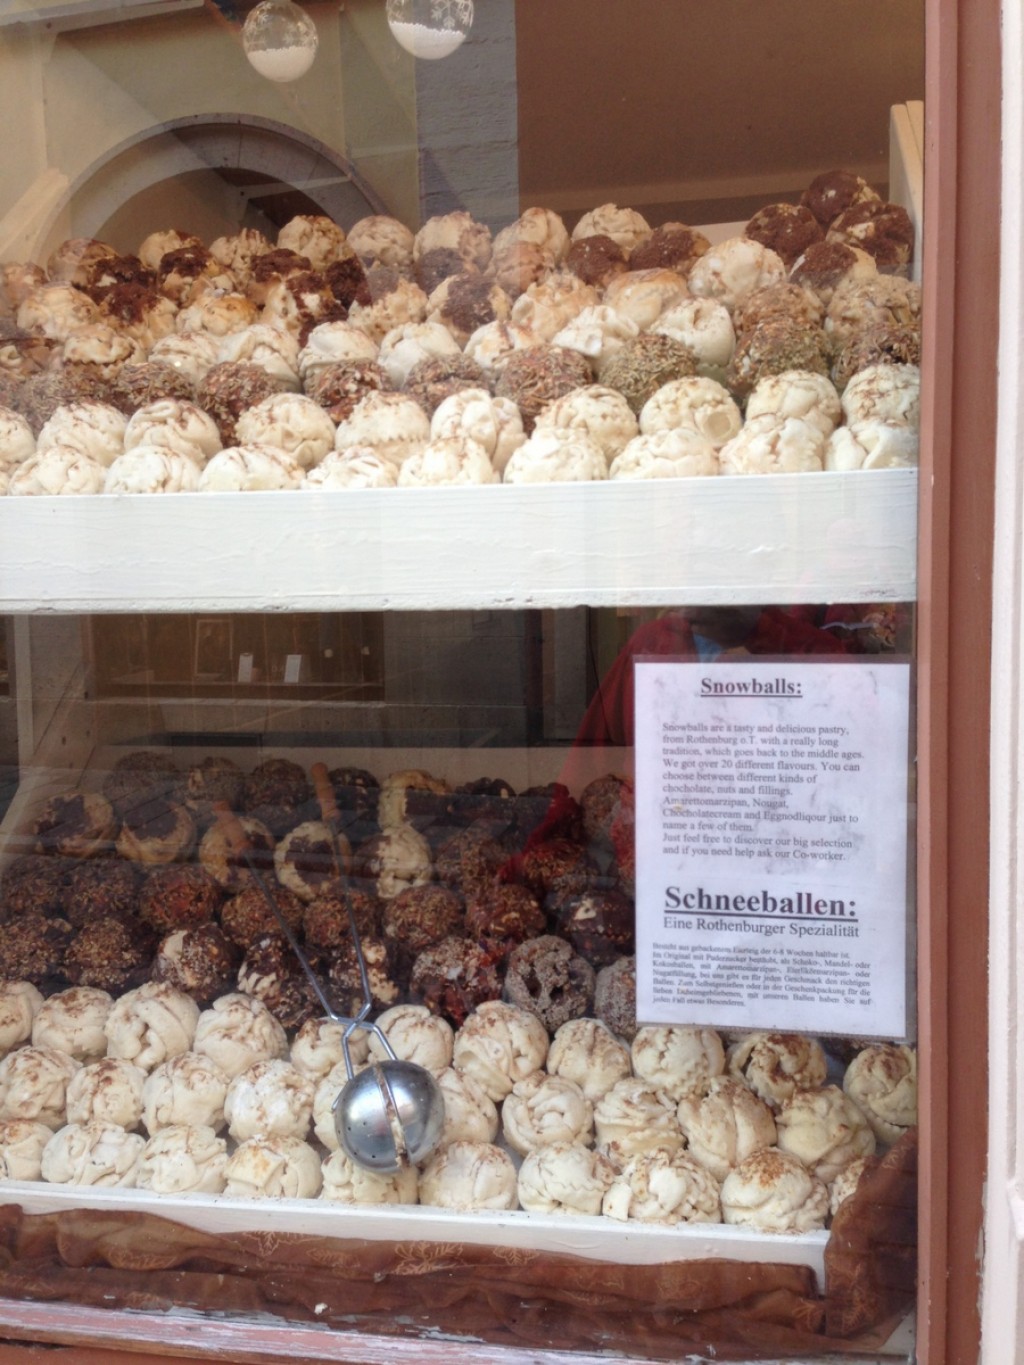 Schneeballen - a pastry made from shortcrust that is a specialty for Rothenburg ob der Tauber